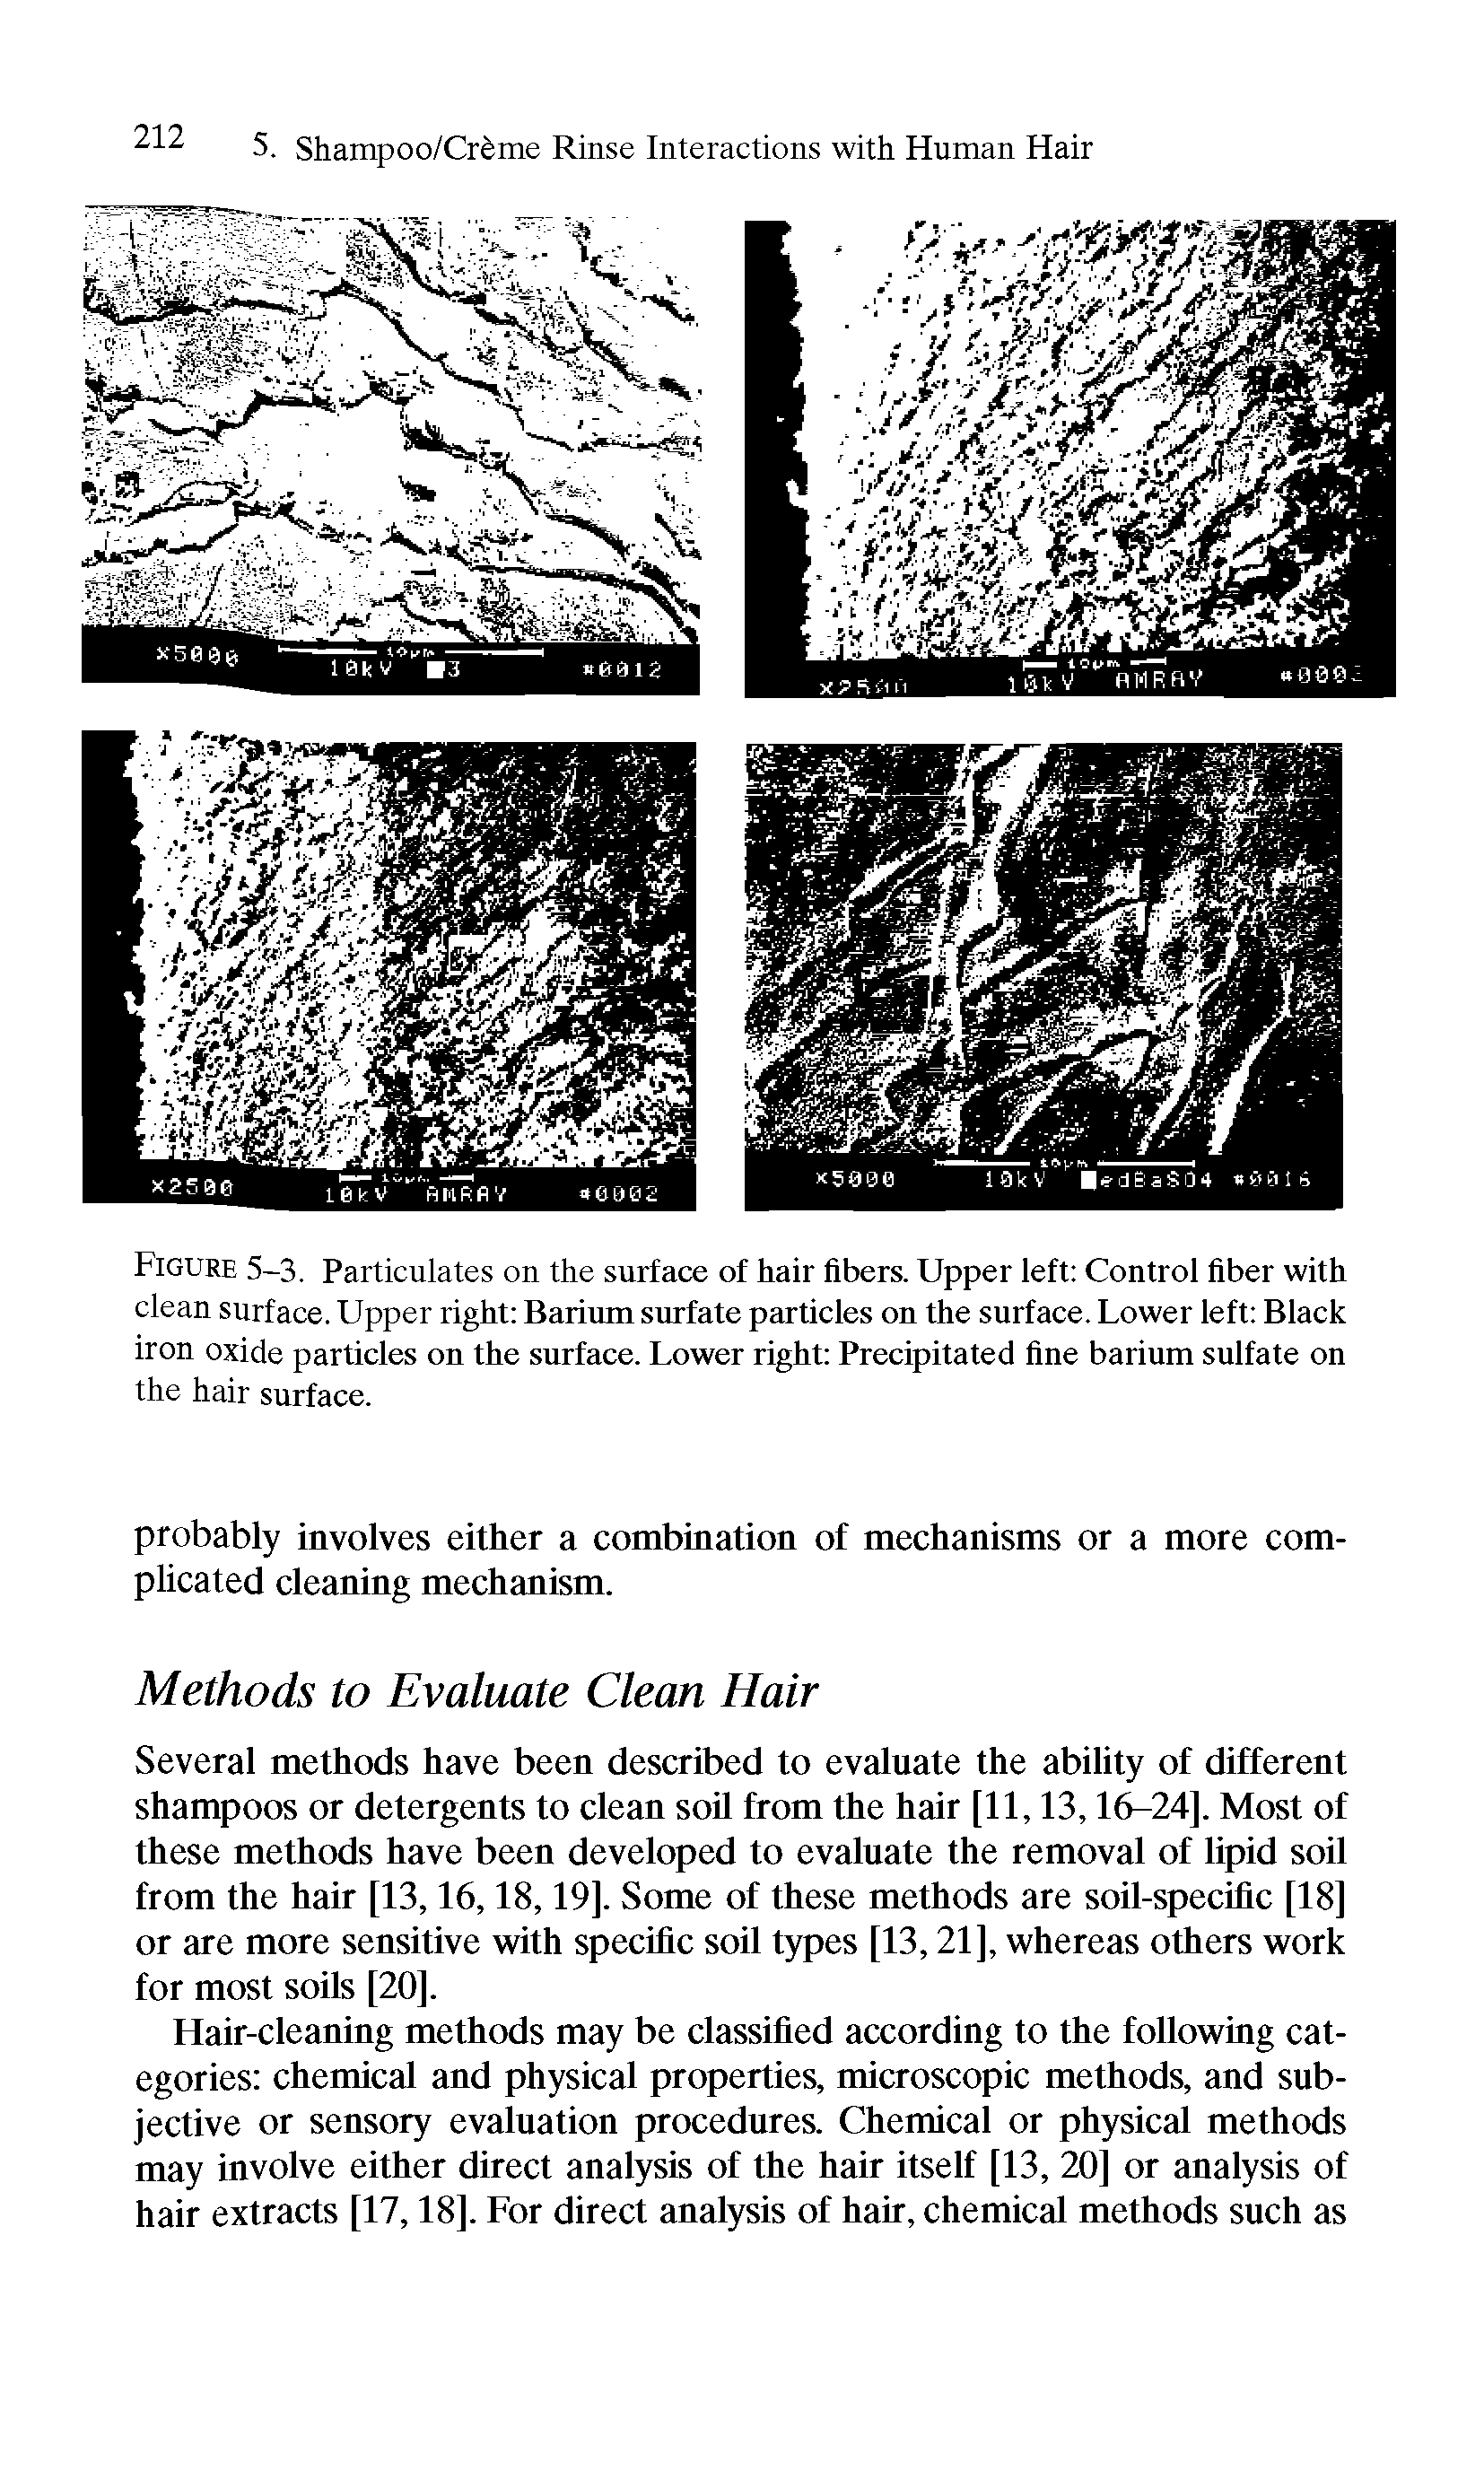 Figure 5-3. Particulates on the surface of hair fibers. Upper left Control fiber with clean surface. Upper right Barium surfate particles on the snrface. Lower left Black iron oxide particles on the surface. Lower right Precipitated fine barinm snlfate on the hair surface.